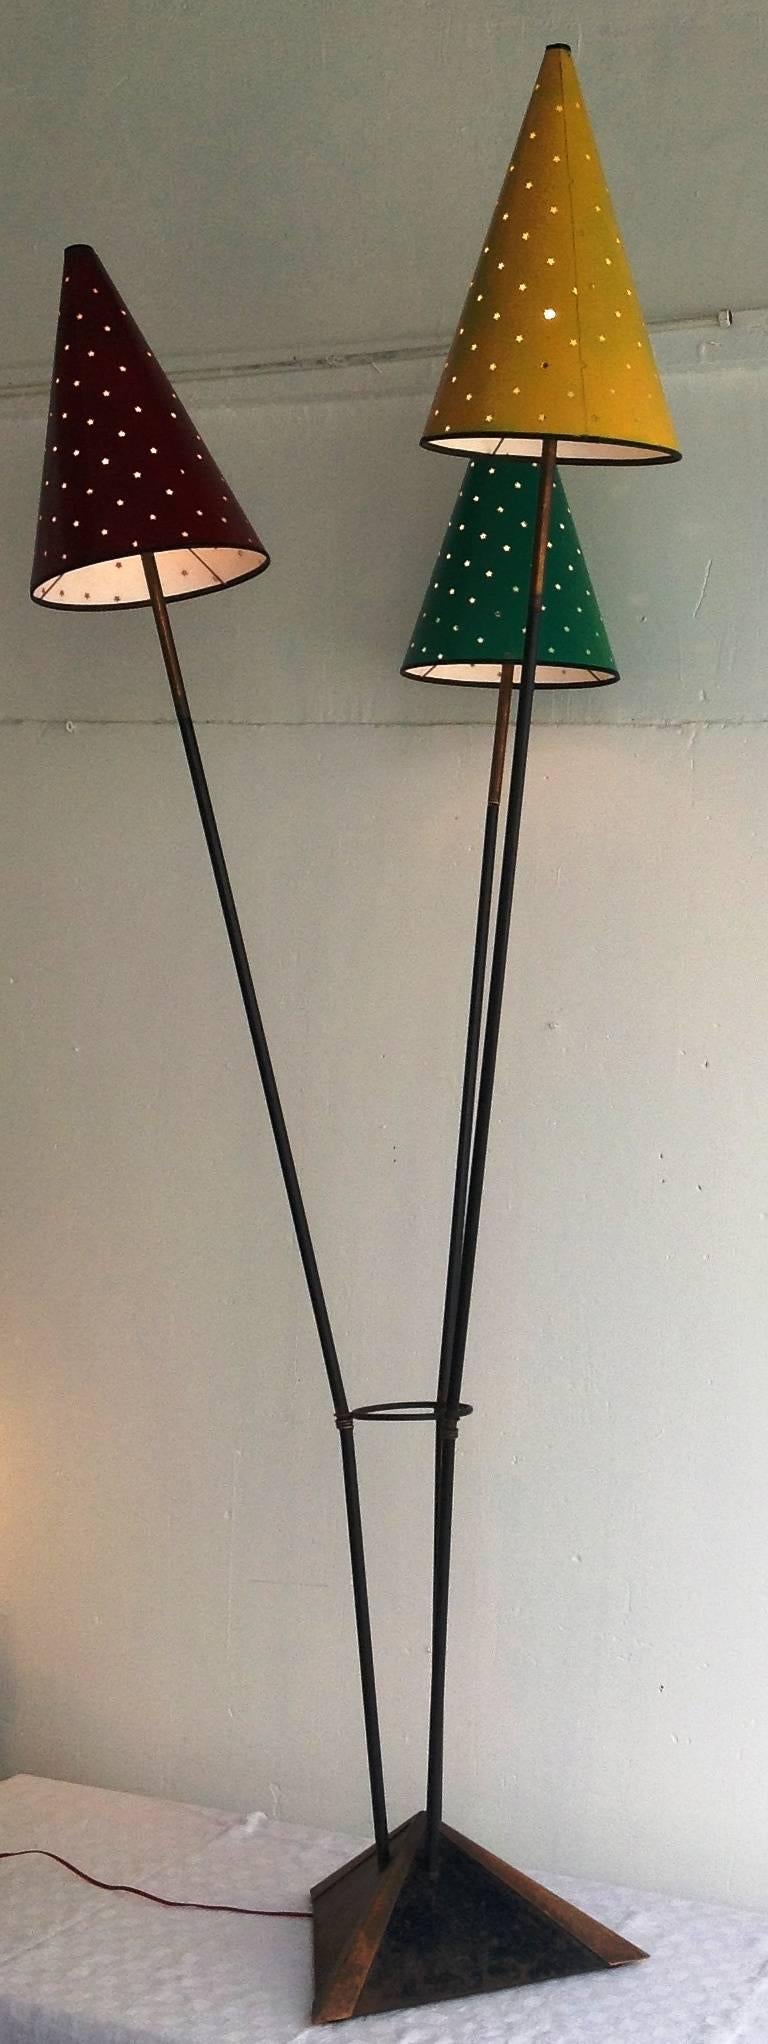 Rare floor lamp with three lights, attributed to Jean Royère, 1950s.
The shades ornate with punched stars seemed to be a special order from Jean Royère to Alexandre Jardon (French lampshade maker, still alive).
The floor lamp is made of black